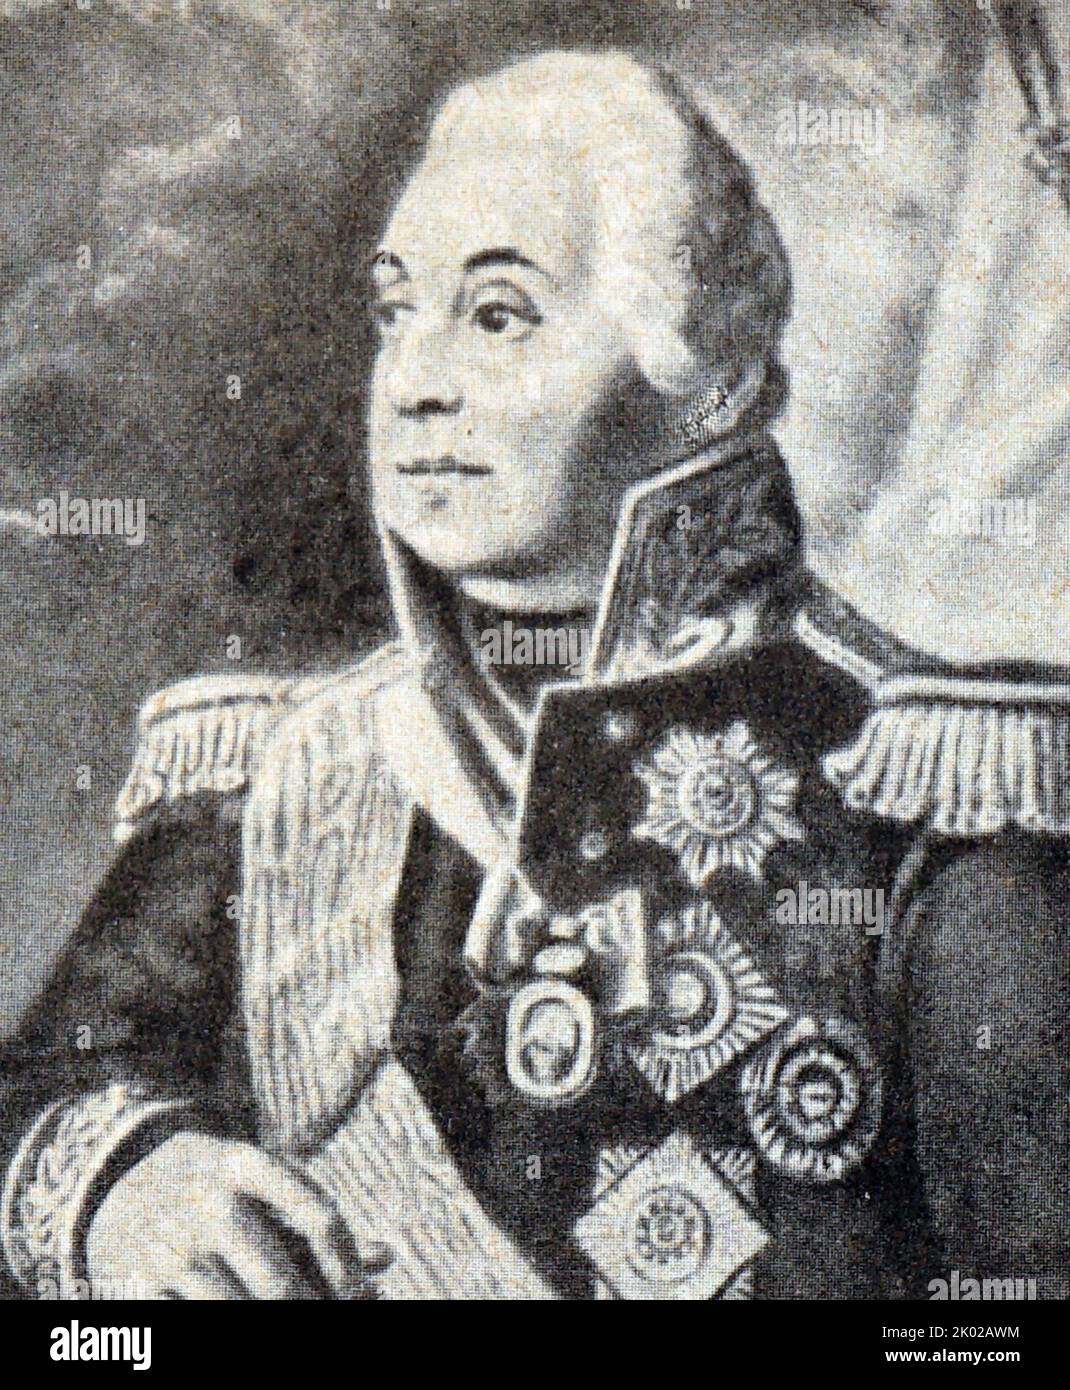 Prince Mikhail Golenishchev-Kutuzov (1745 - 1813) Field Marshal of the Russian Empire. He served as one of the finest military officers and diplomats of Russia under the reign of three Romanov Tsars: Catherine II, Paul I and Alexander I. Stock Photo